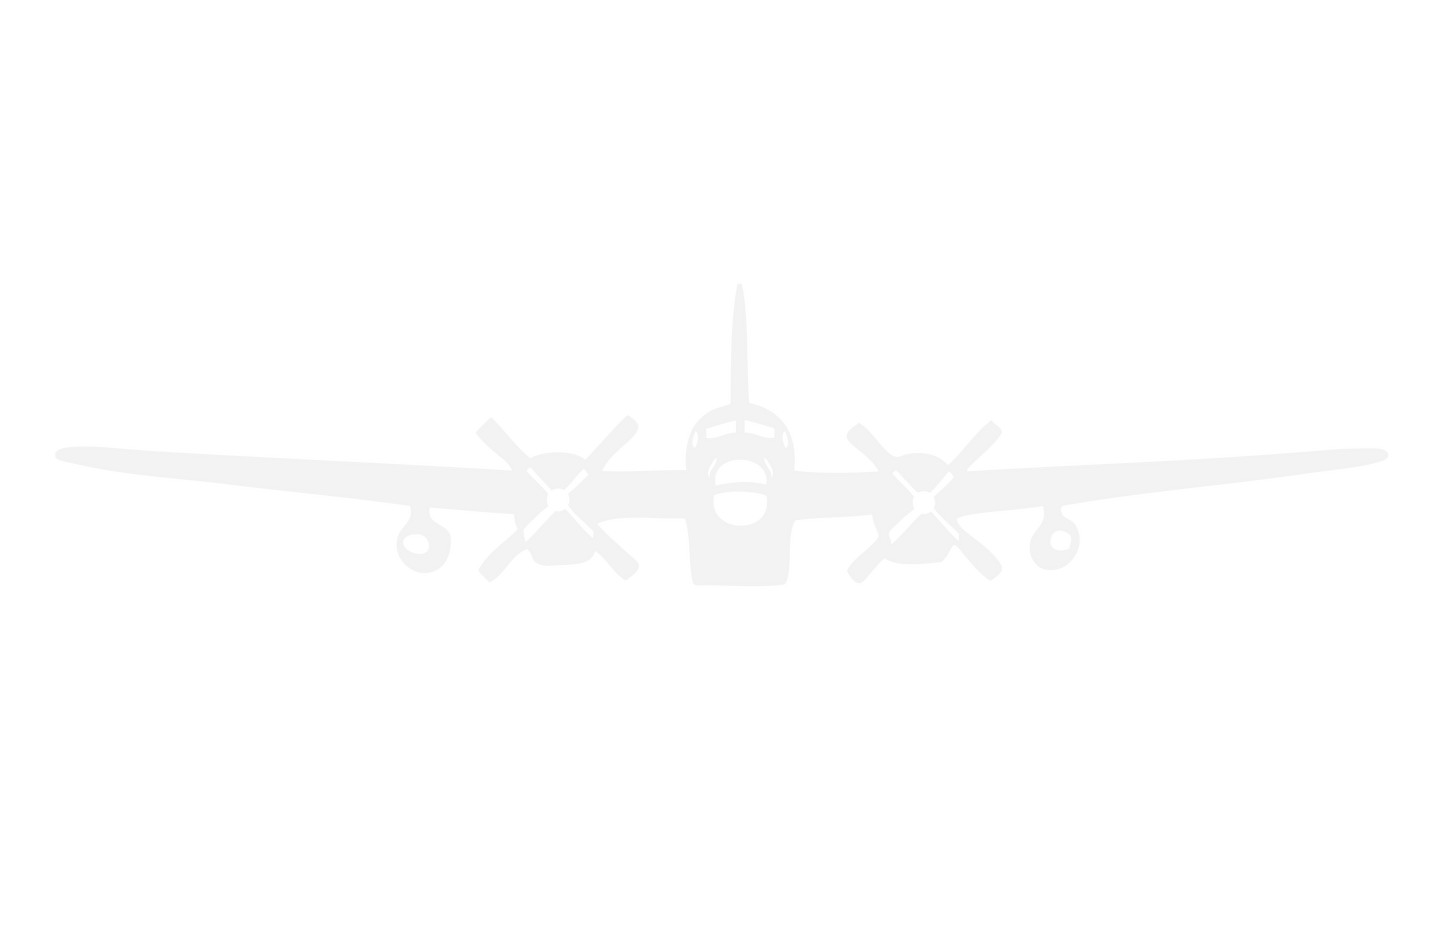 P2V Silhouette Decal 12"